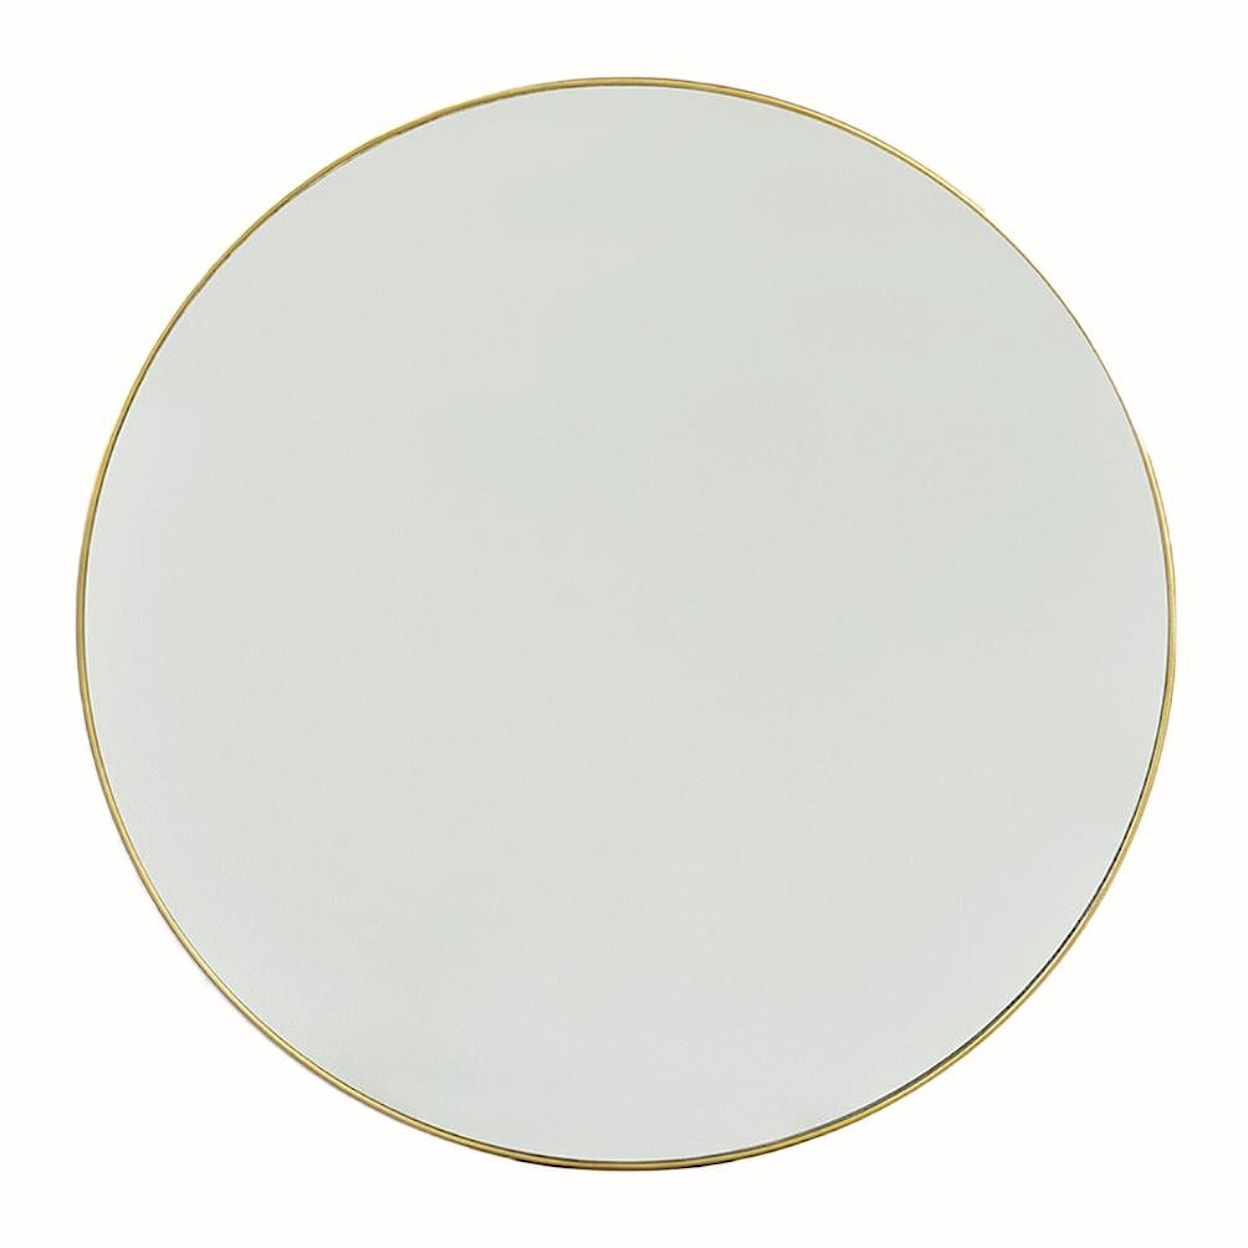 Oliver Home Furnishings Mirrors Round Mirror with French Cleat Mount